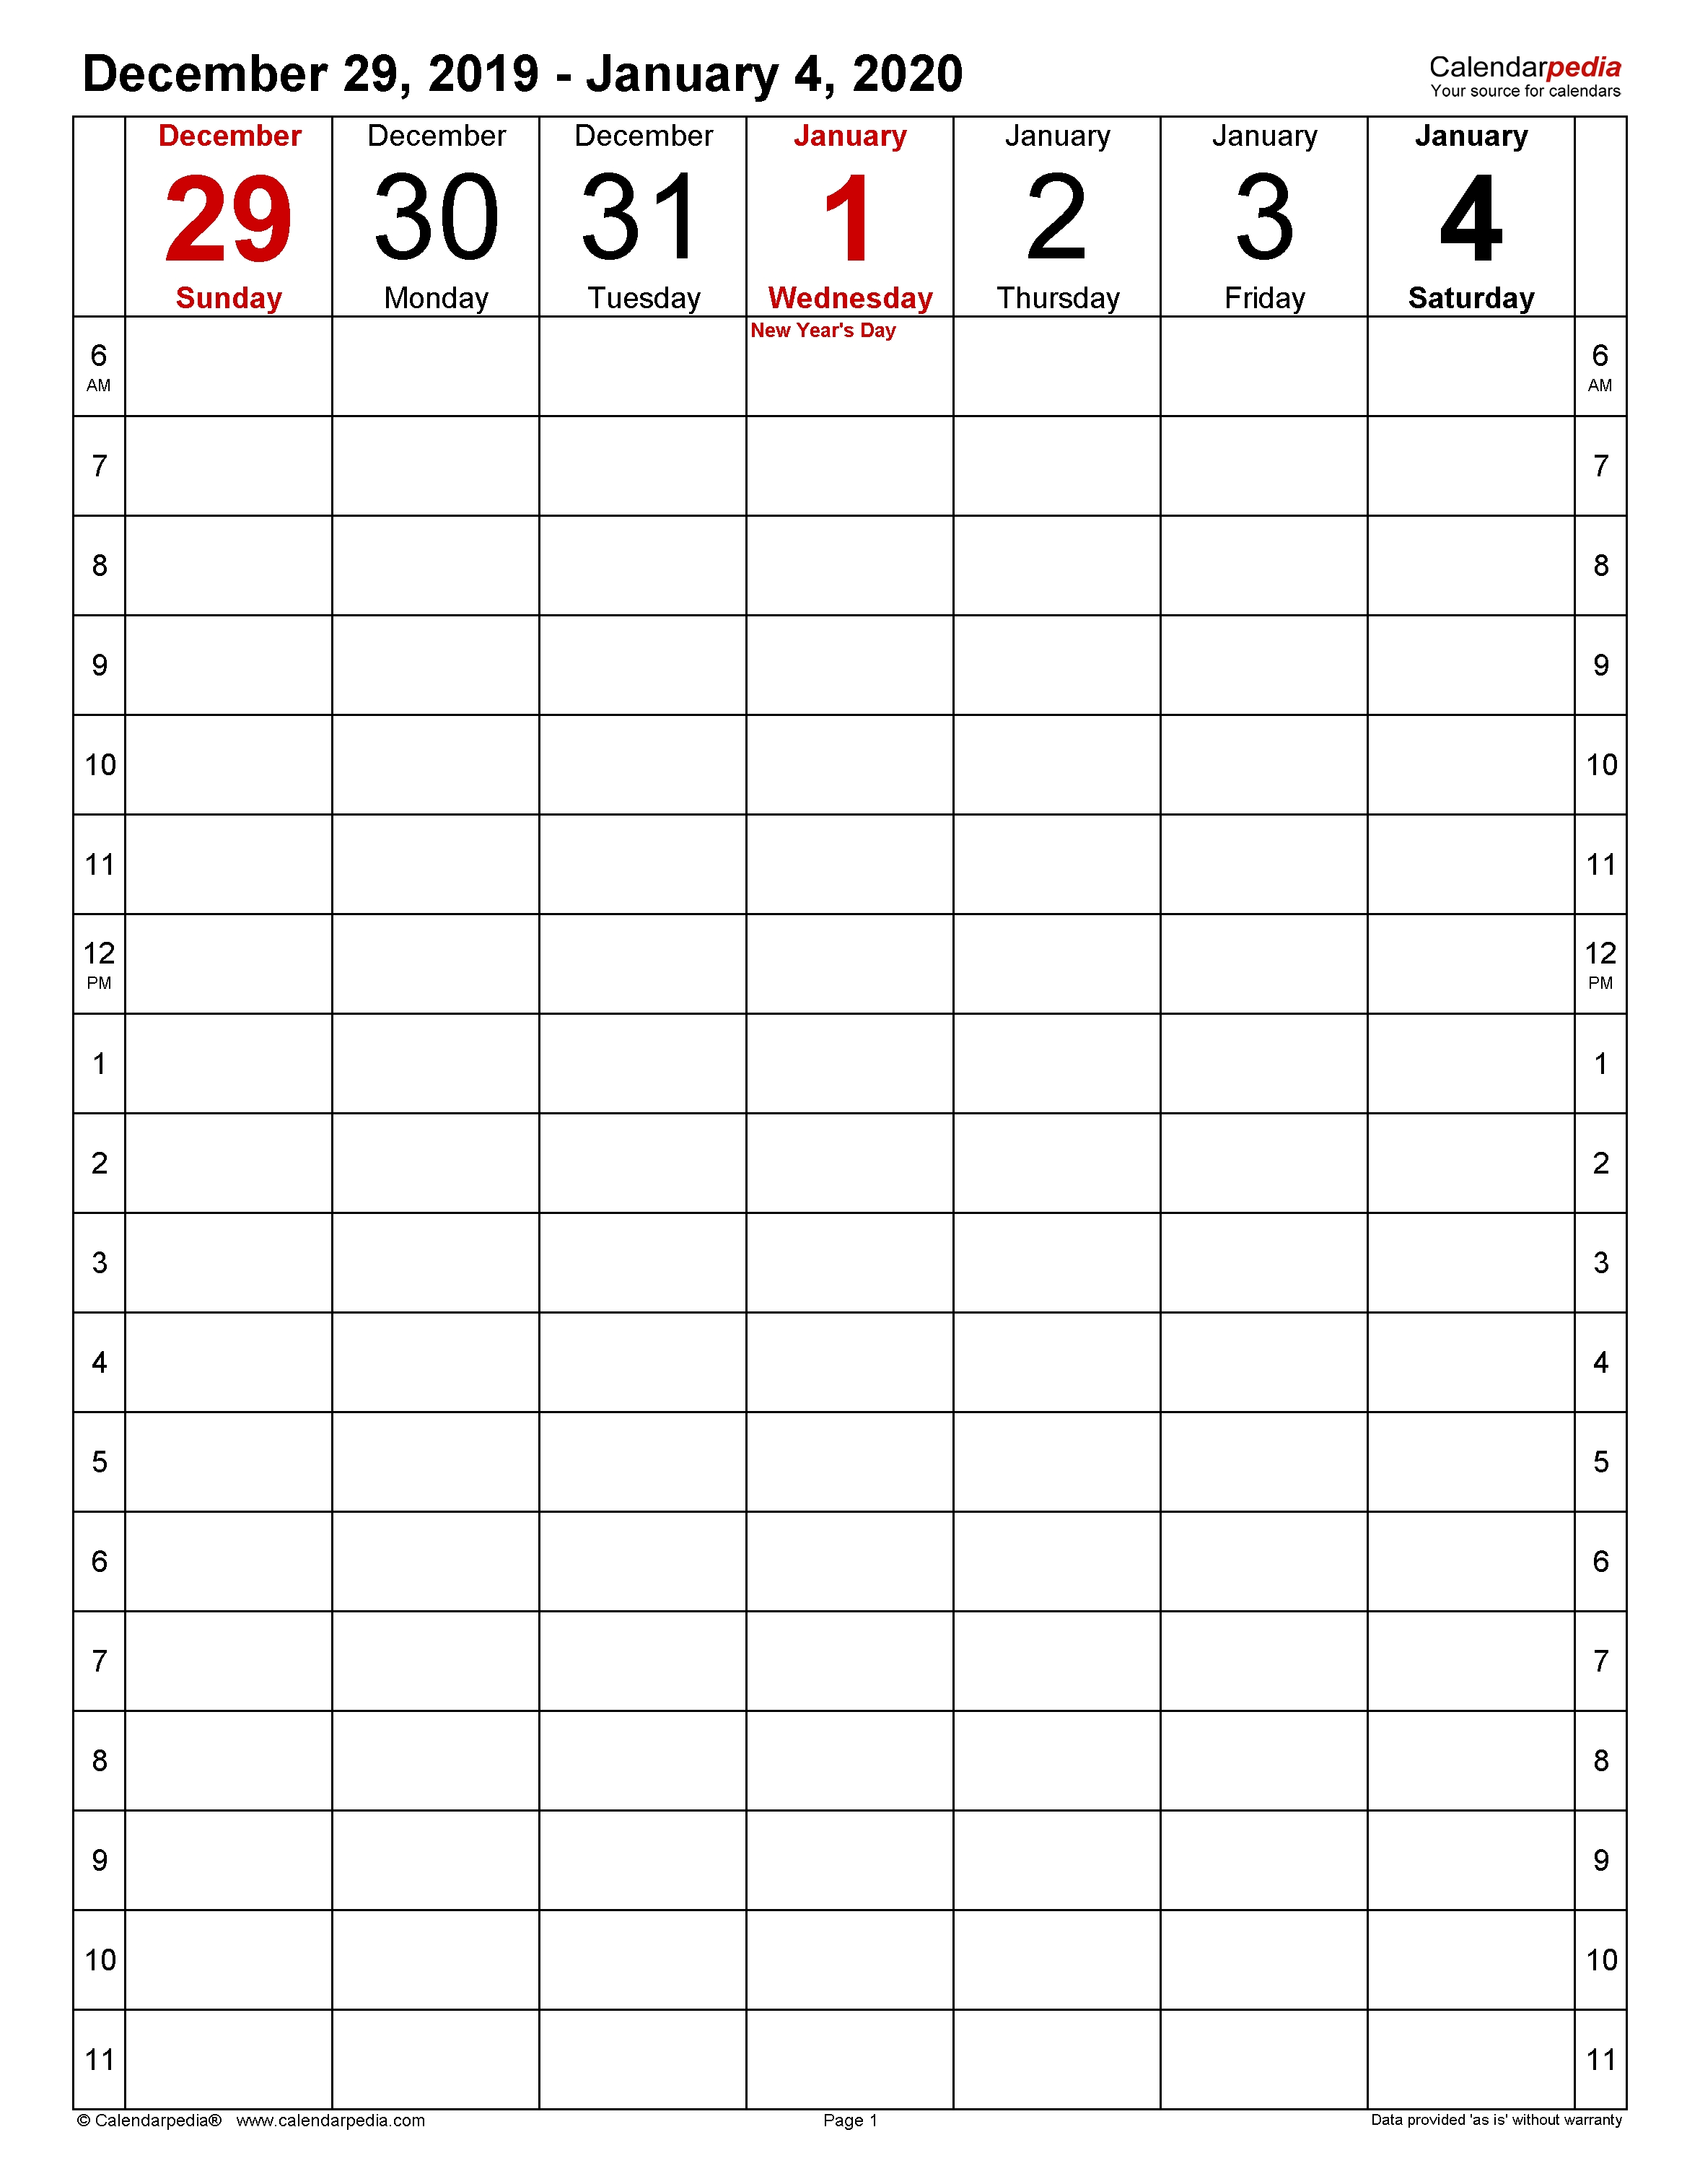 Weekly Calendars 2020 For Pdf - 12 Free Printable Templates